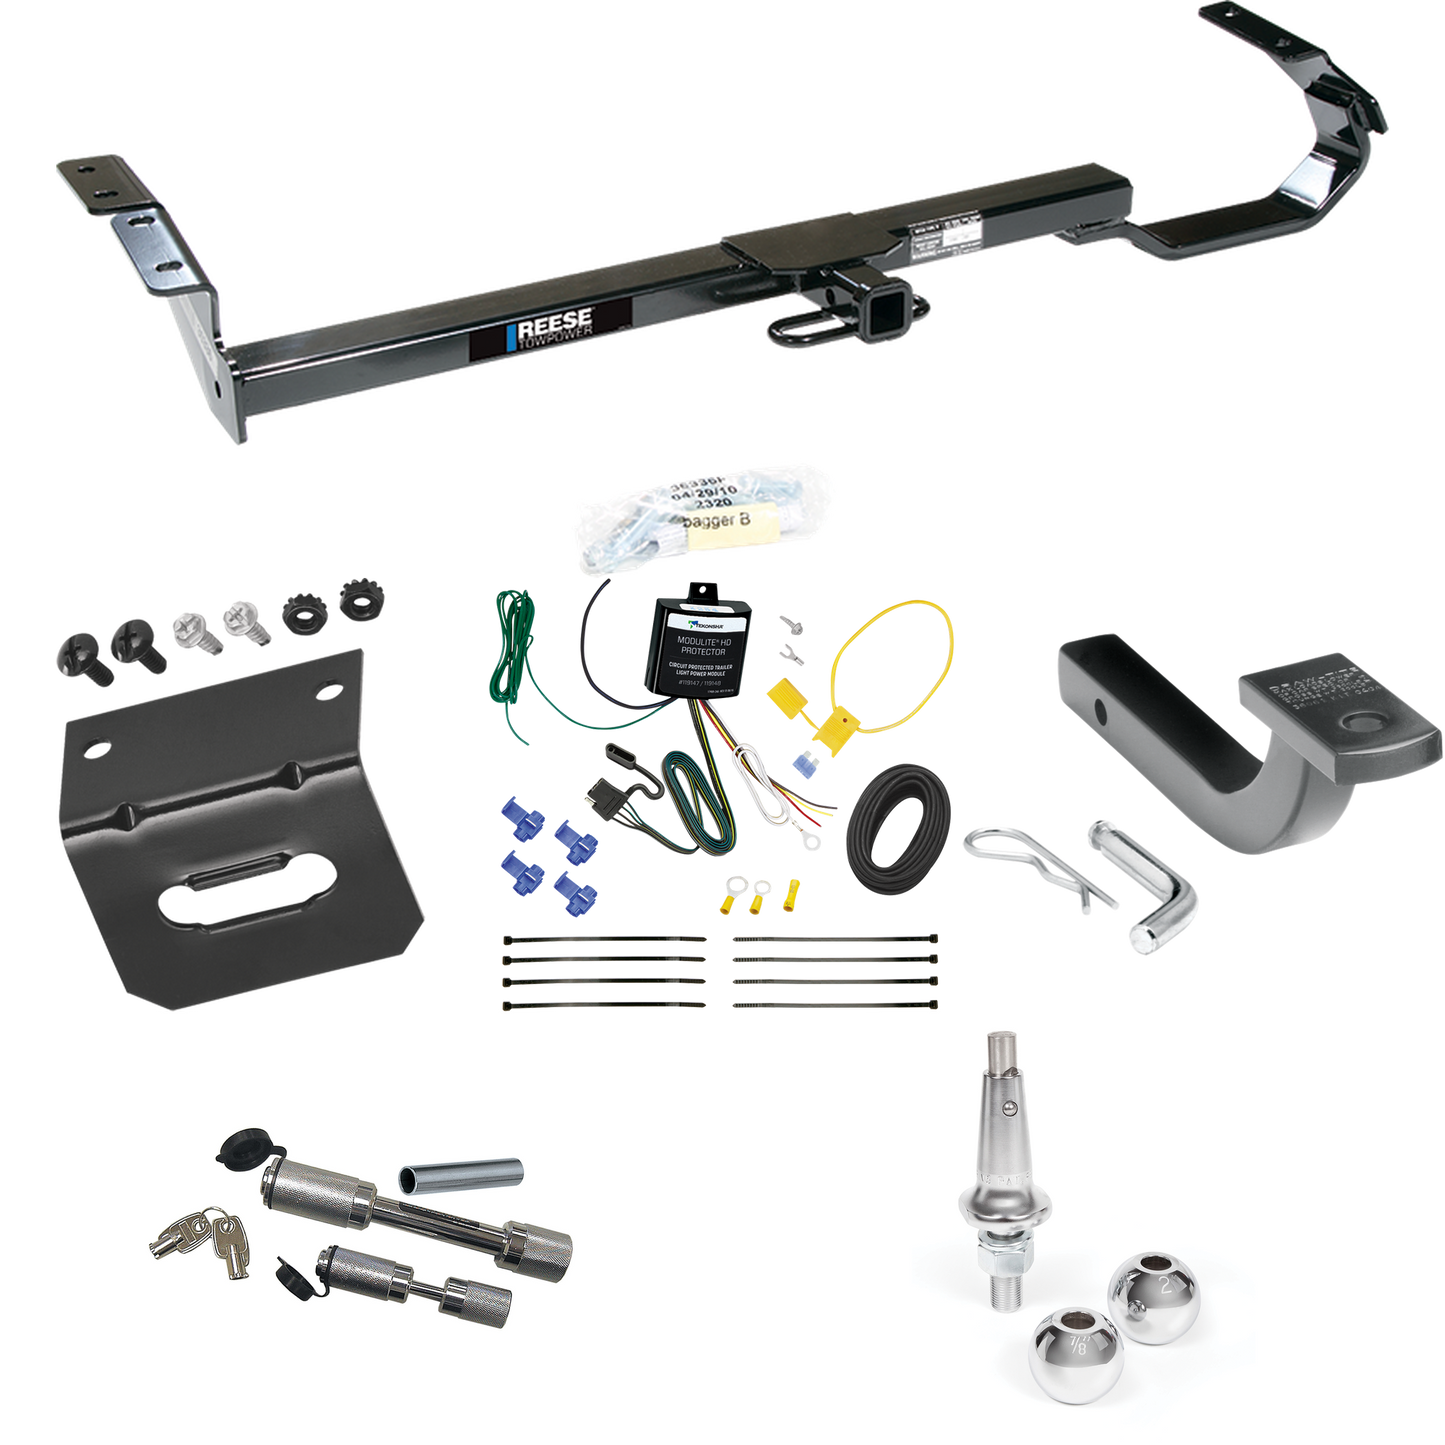 Fits 1992-1996 Toyota Camry Trailer Hitch Tow PKG w/ 4-Flat Wiring Harness + Draw-Bar + Interchangeable 1-7/8" & 2" Balls + Wiring Bracket + Dual Hitch & Coupler Locks By Reese Towpower